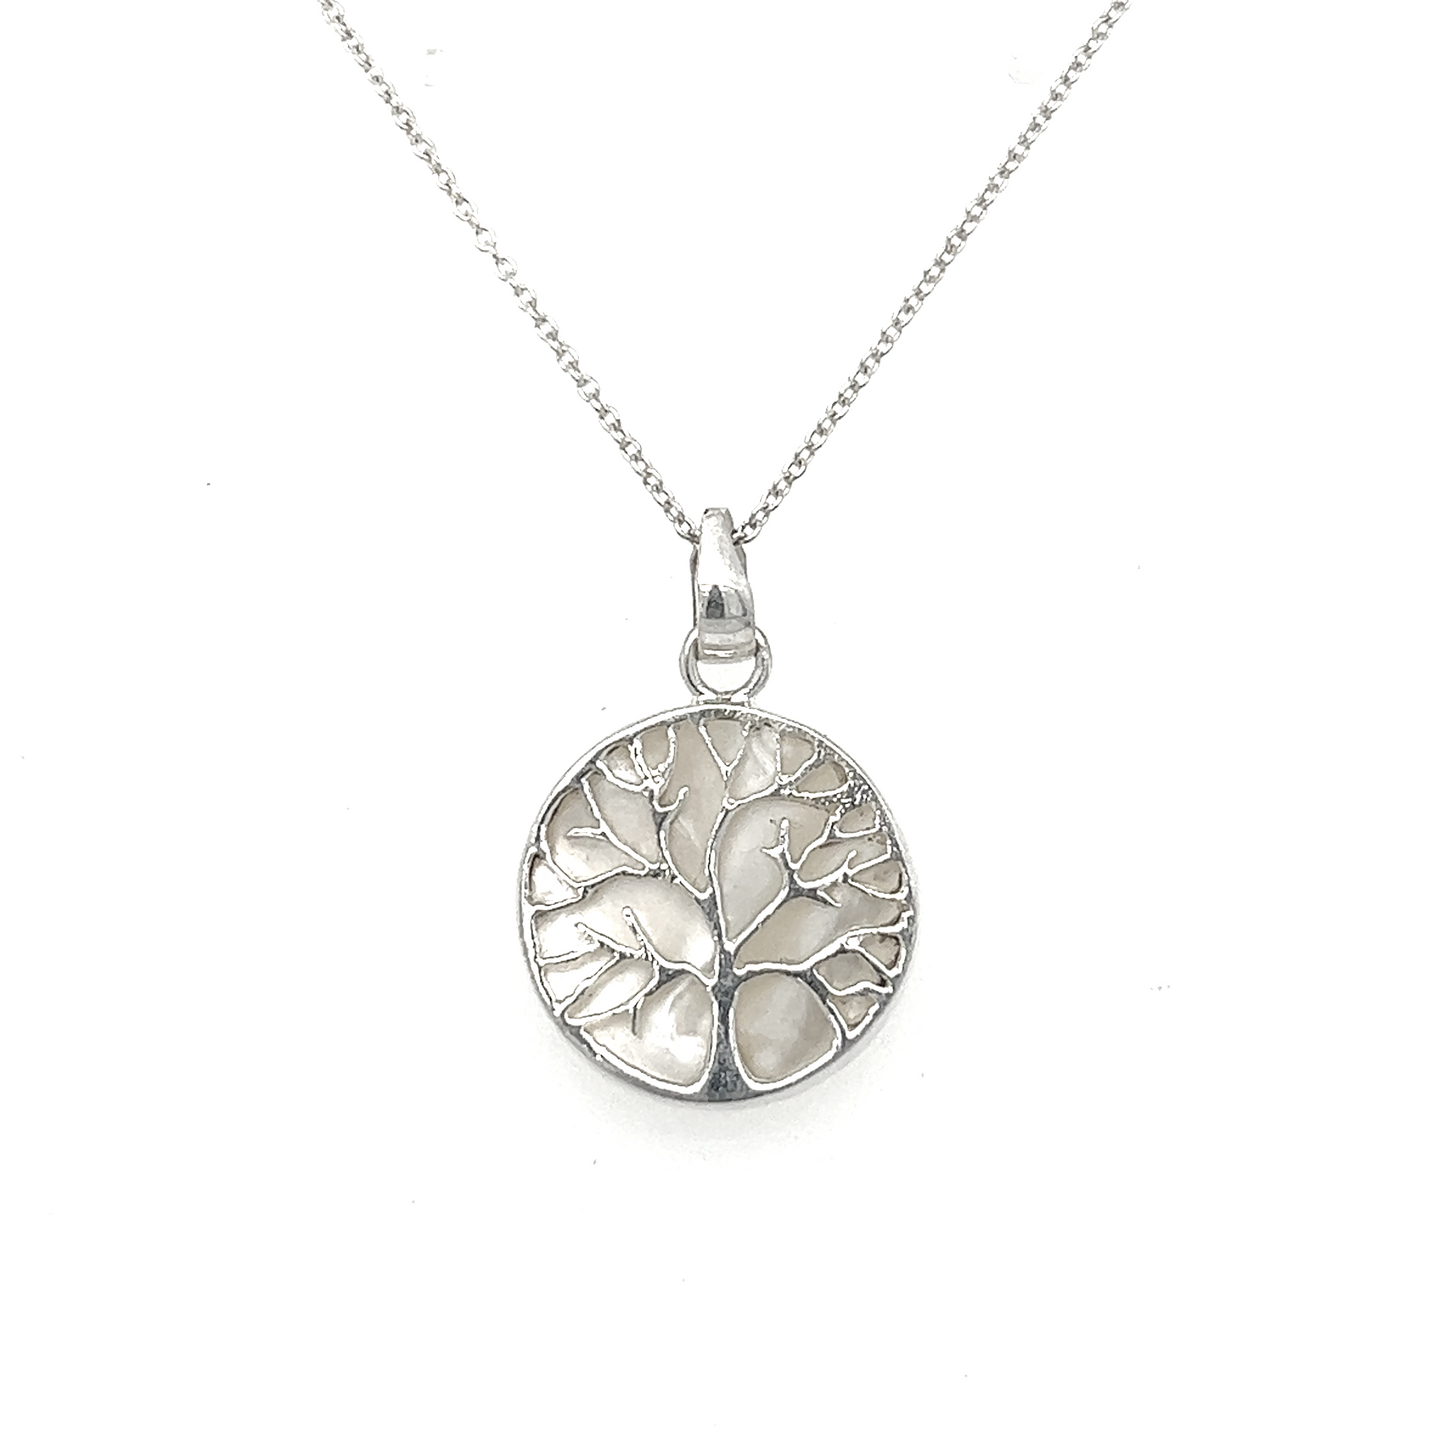 A reversible Mother of Pearl Medallion with Tree Of Life pendant on a nature-inspired chain.